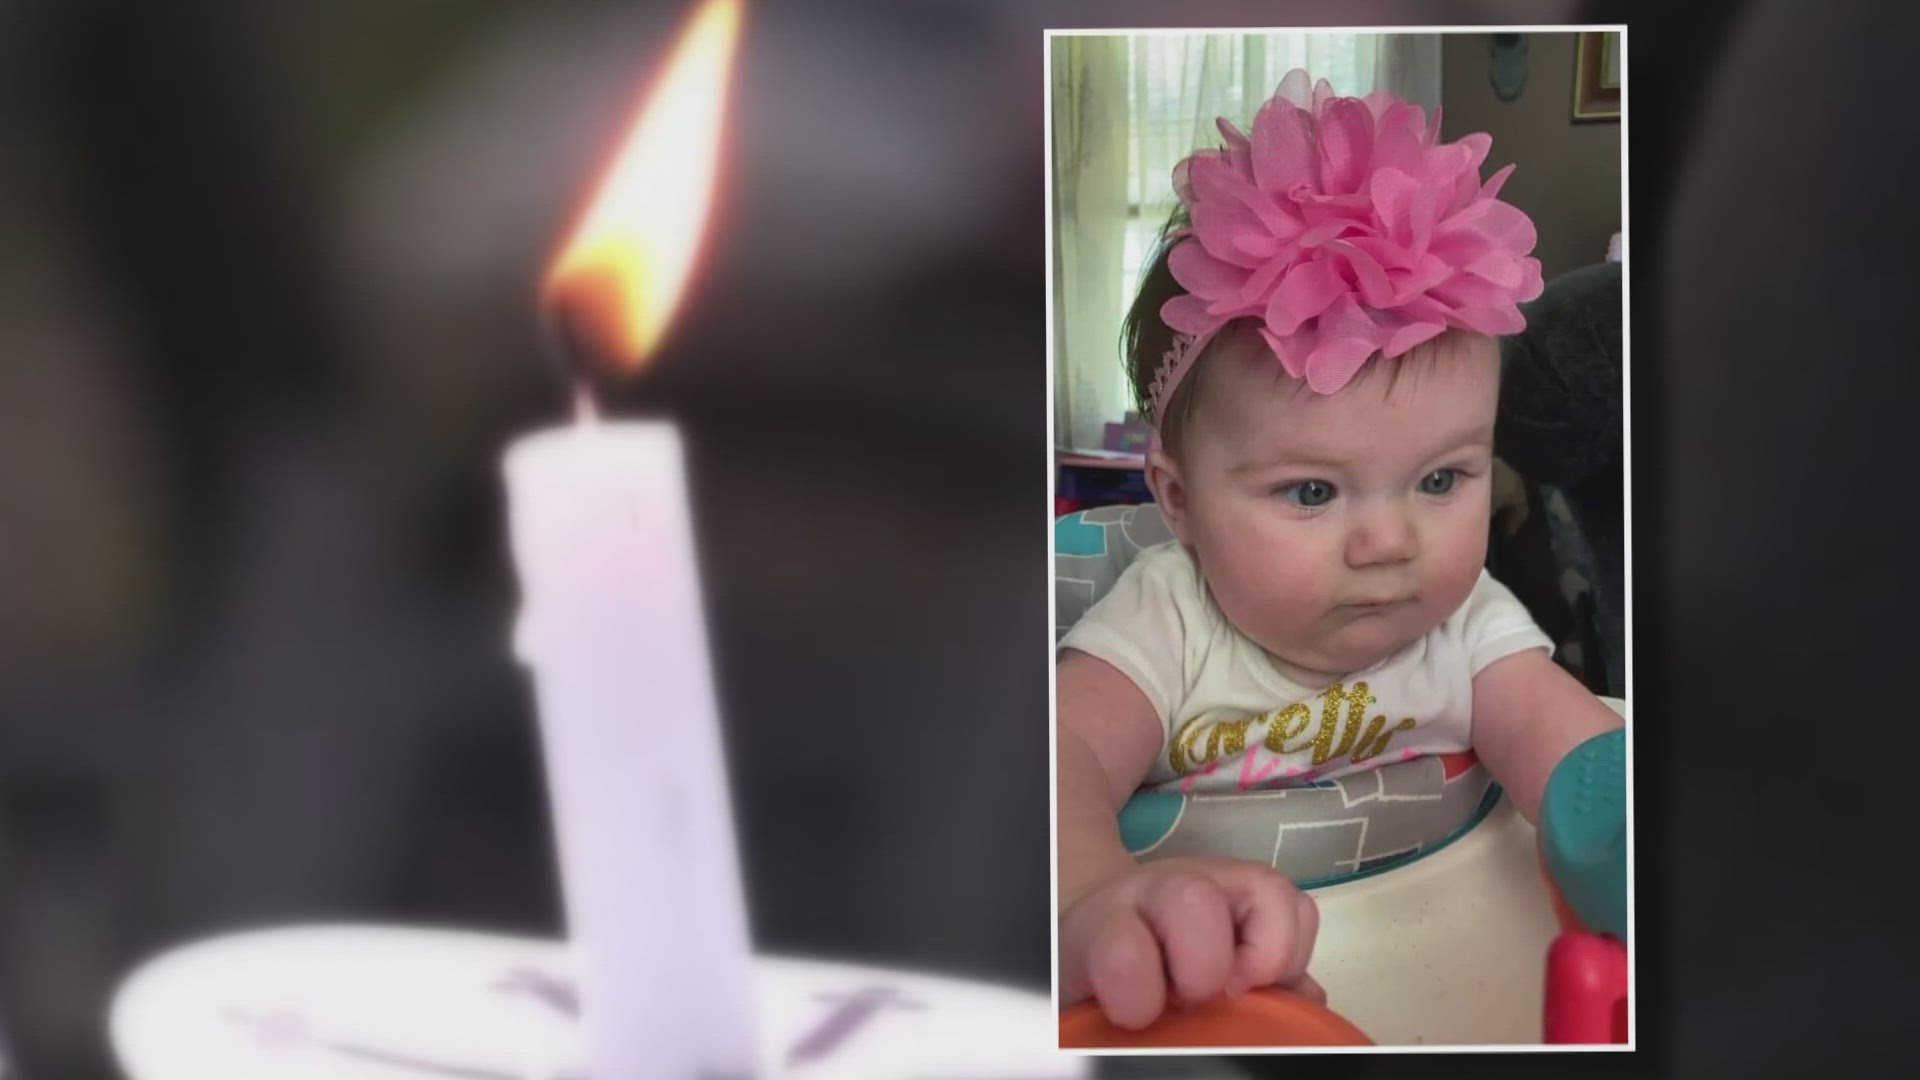 Elena Hembree would have turned 2 years old on Tuesday. She was 17 months old when she died.